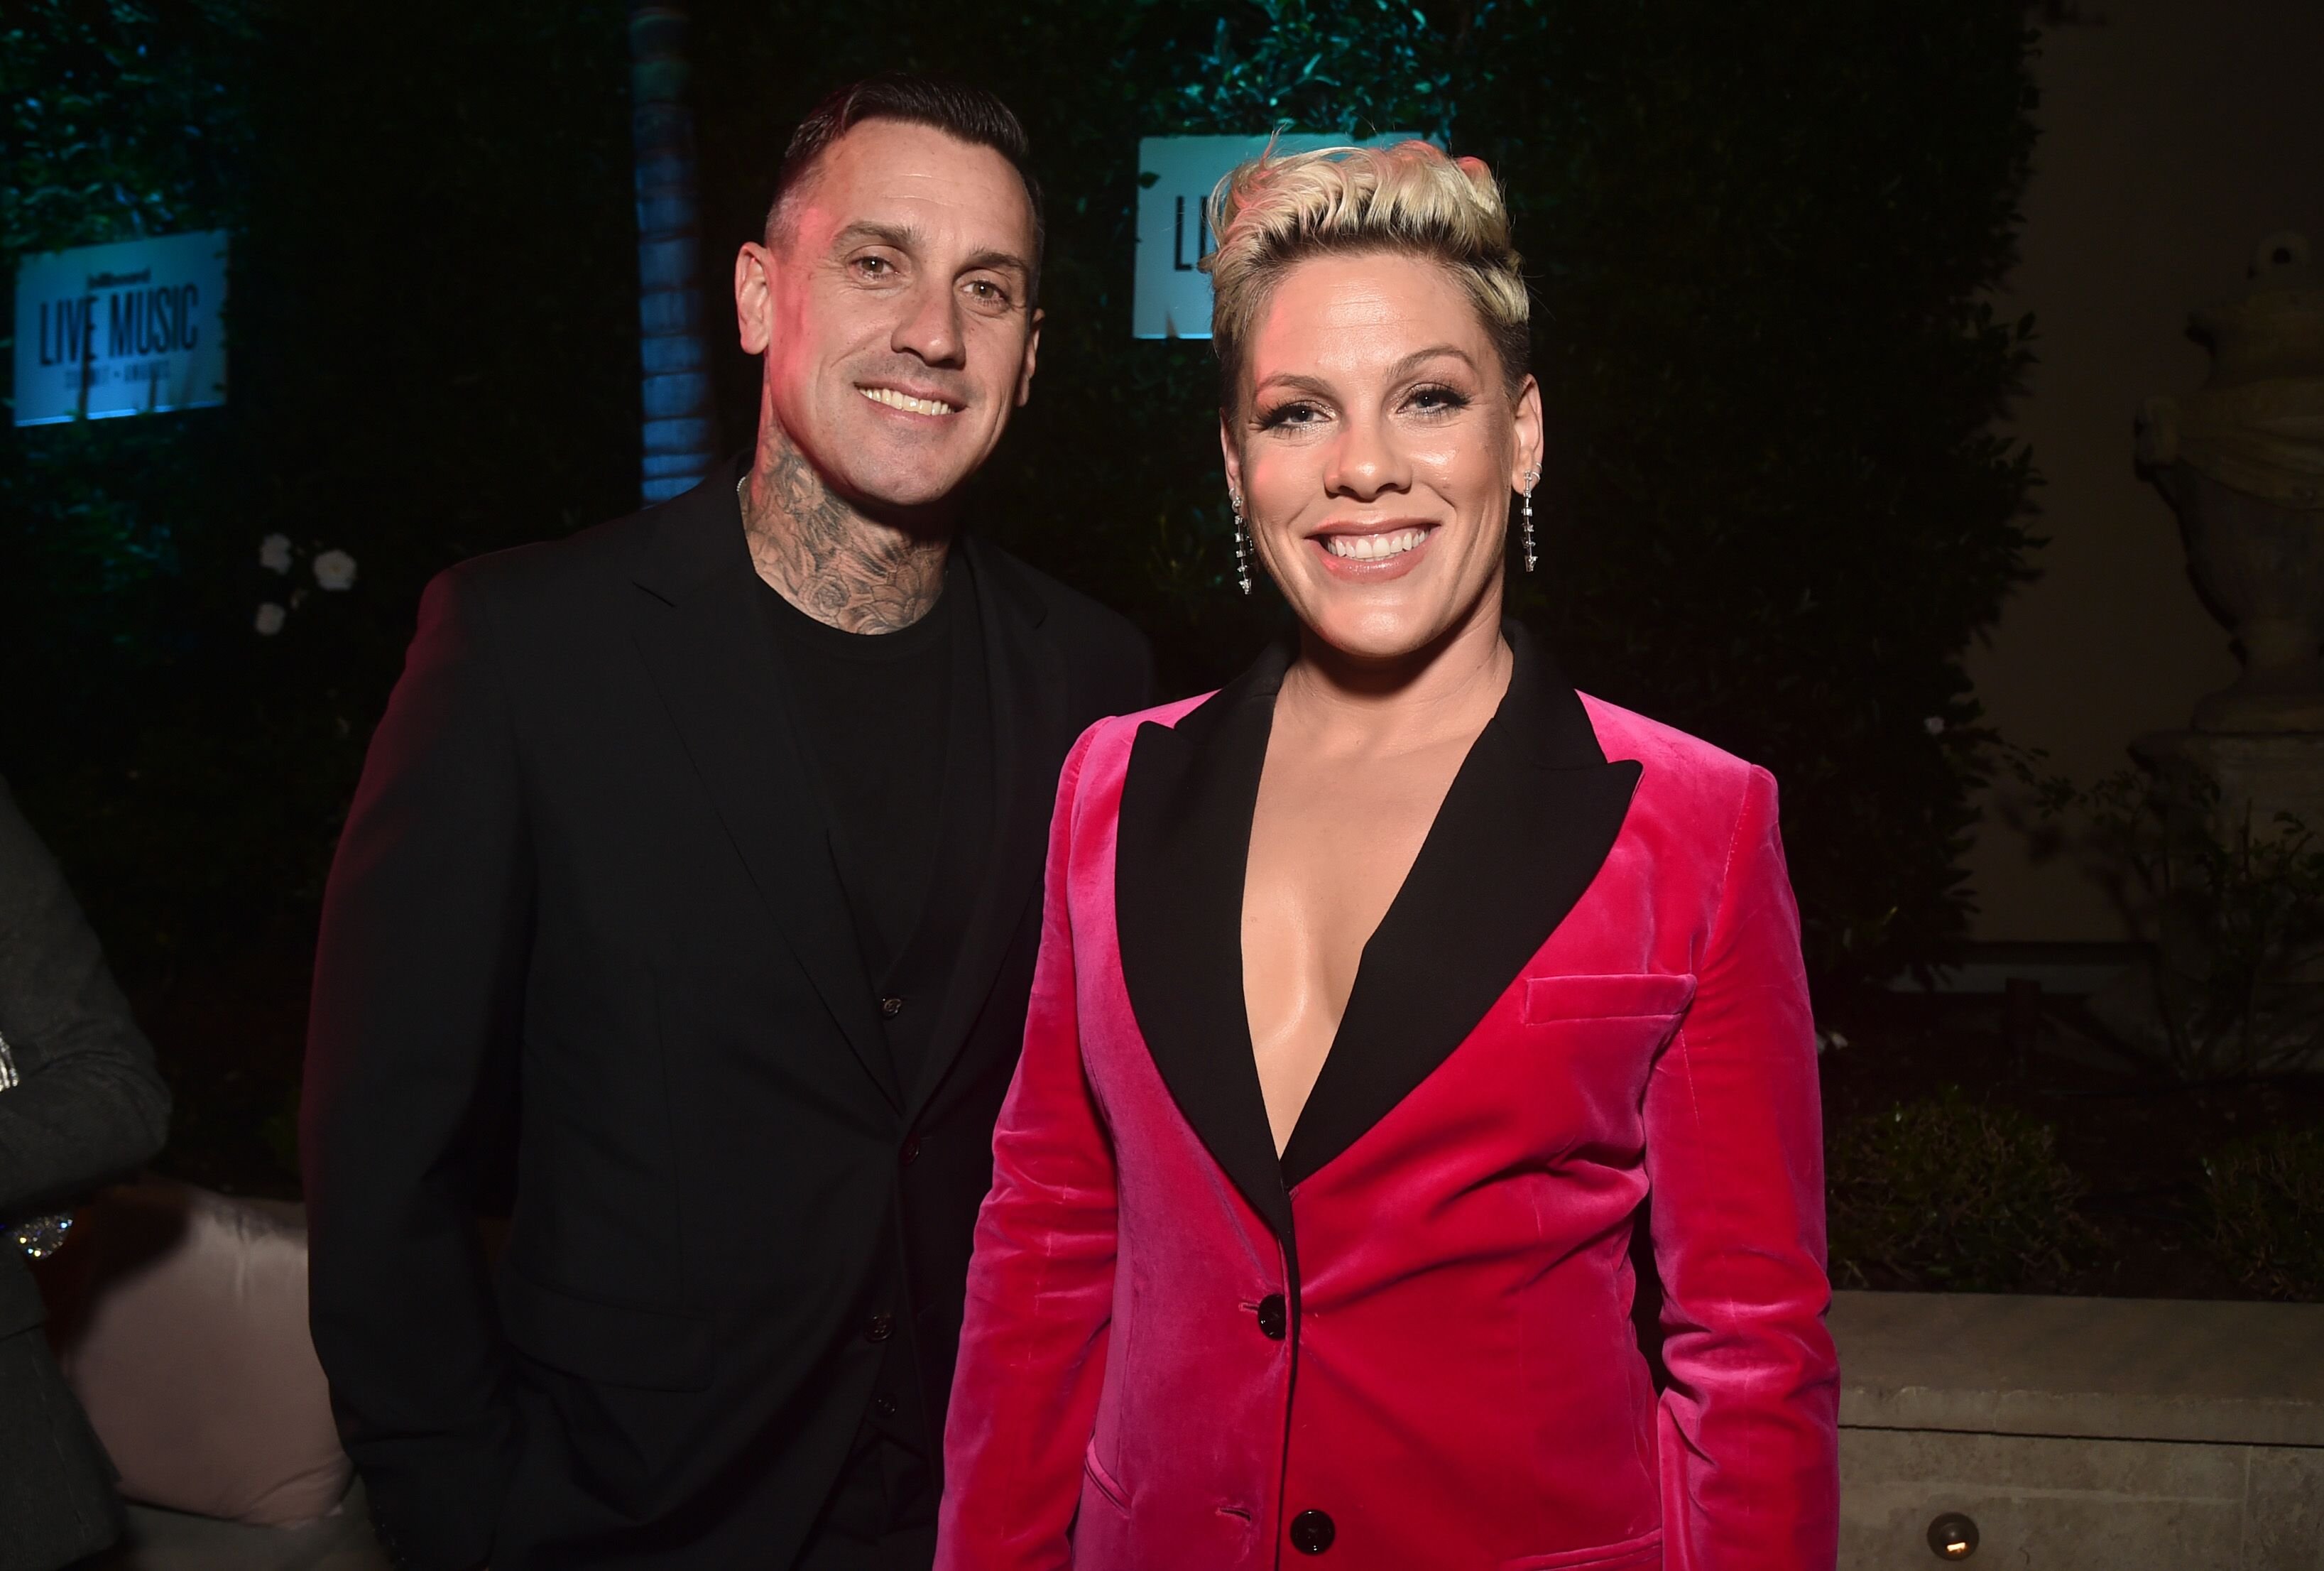 Carey Hart and Pink attend Billboard's 2019 LIve Music Summit and Awards Ceremony at the Montage Hotel on November 05, 2019 | Photo: Getty Images